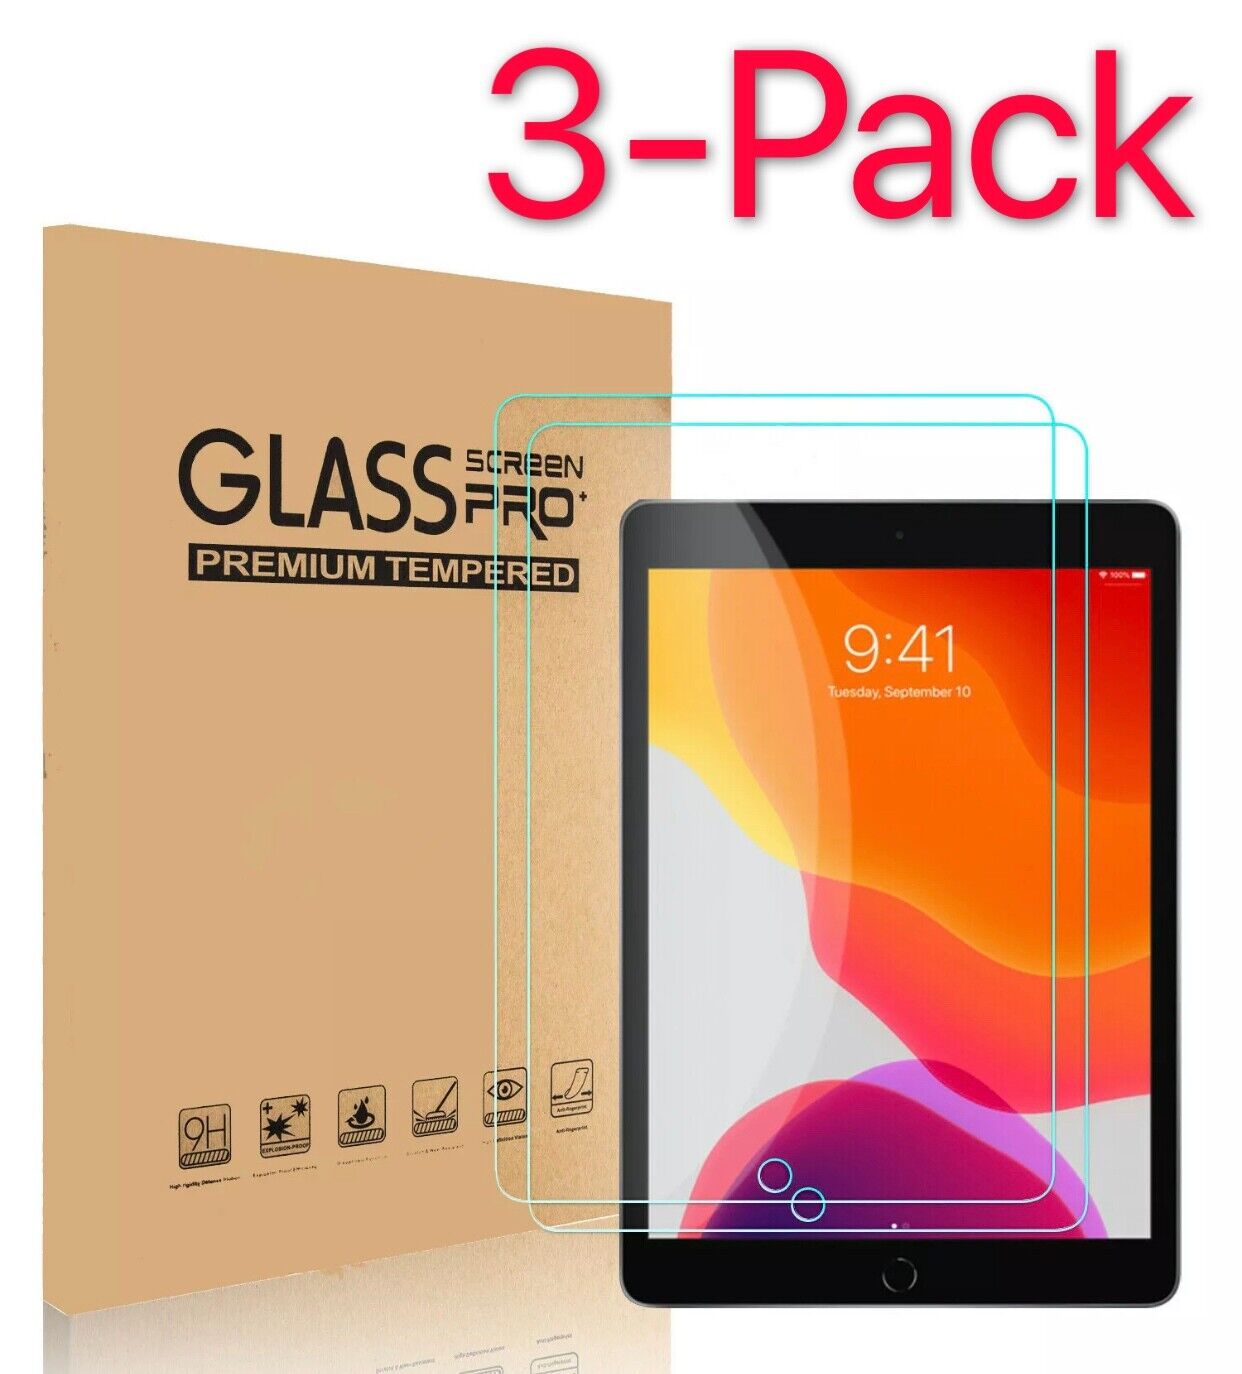 3-Pack Tempered GLASS Screen Protector for Apple iPad 10.2 9th Generation 2021 Unbranded Does Not Apply